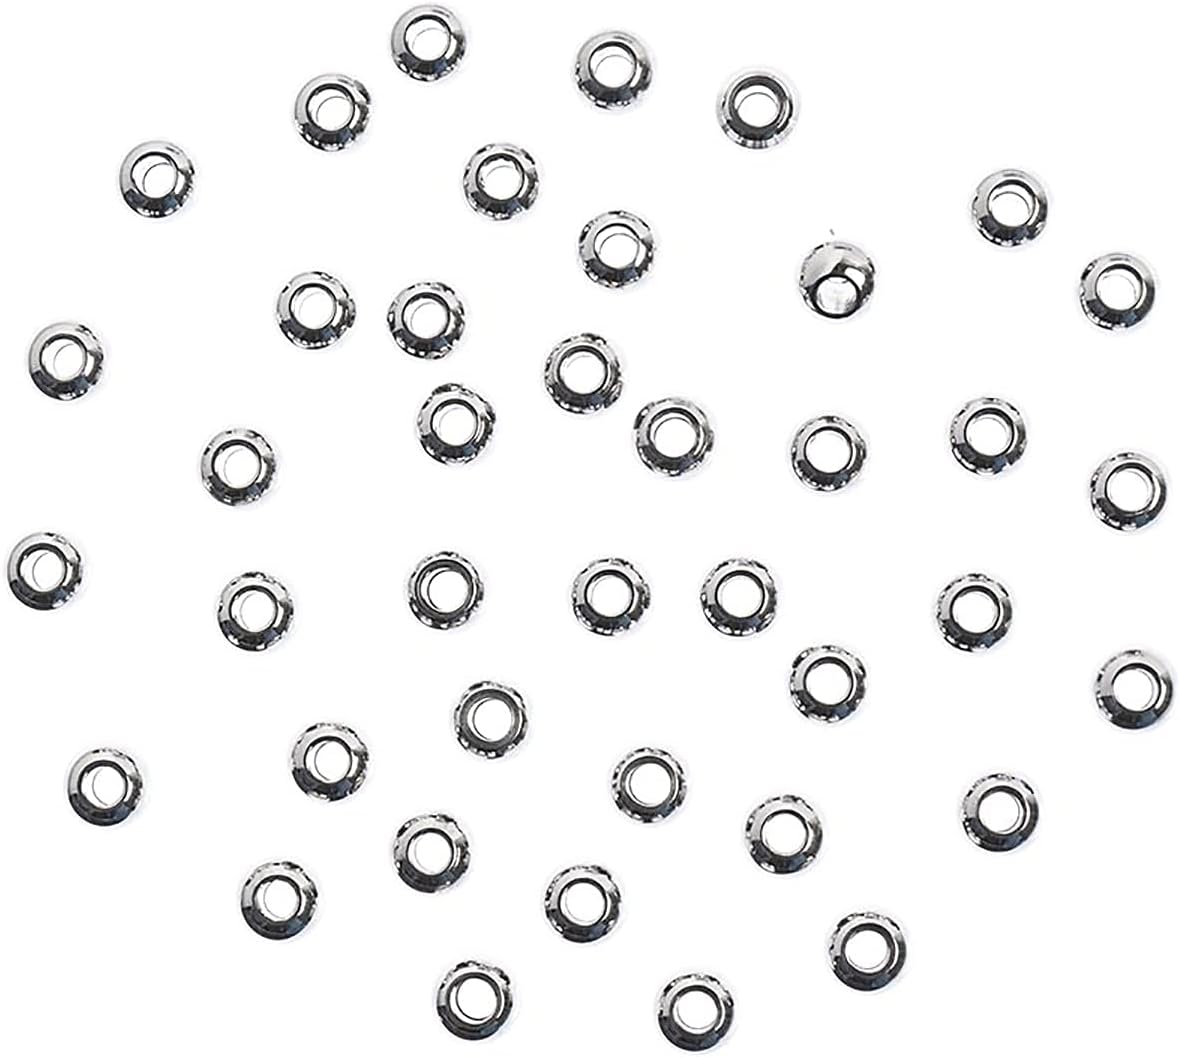 John Bead Stainless Steel Silver Round Spacer Beads